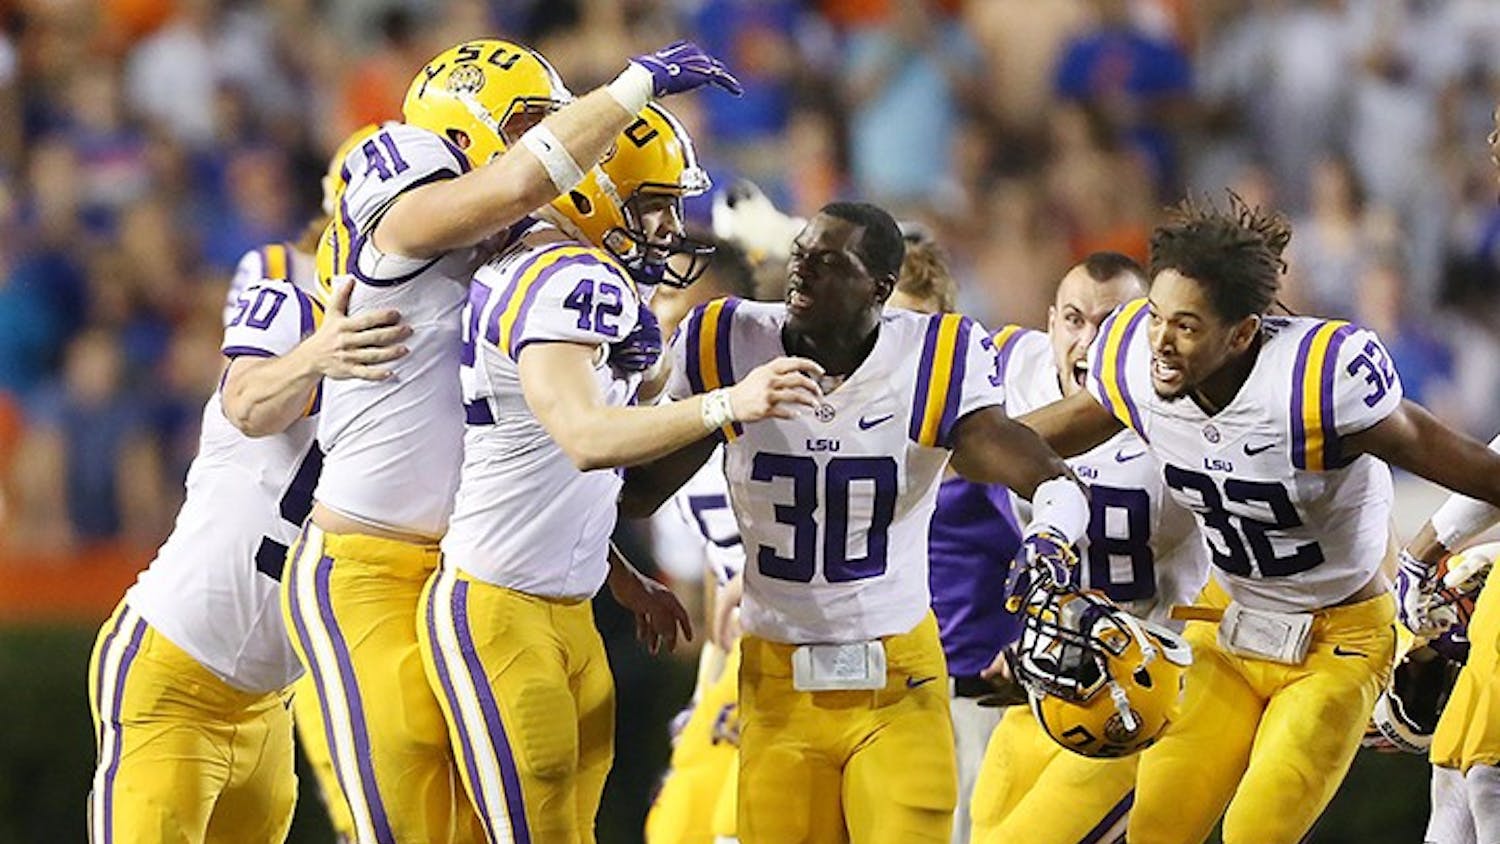 LSU players mob kicker Colby Delahoussaye (42) after he kicked a last-second 50-yard field goal against Florida at Ben Hill Griffin Stadium in Gainesville, Fla., on Saturday, Oct. 11, 2014. LSU won, 30-27. (Stephen M. Dowell/Orlando Sentinel/MCT)